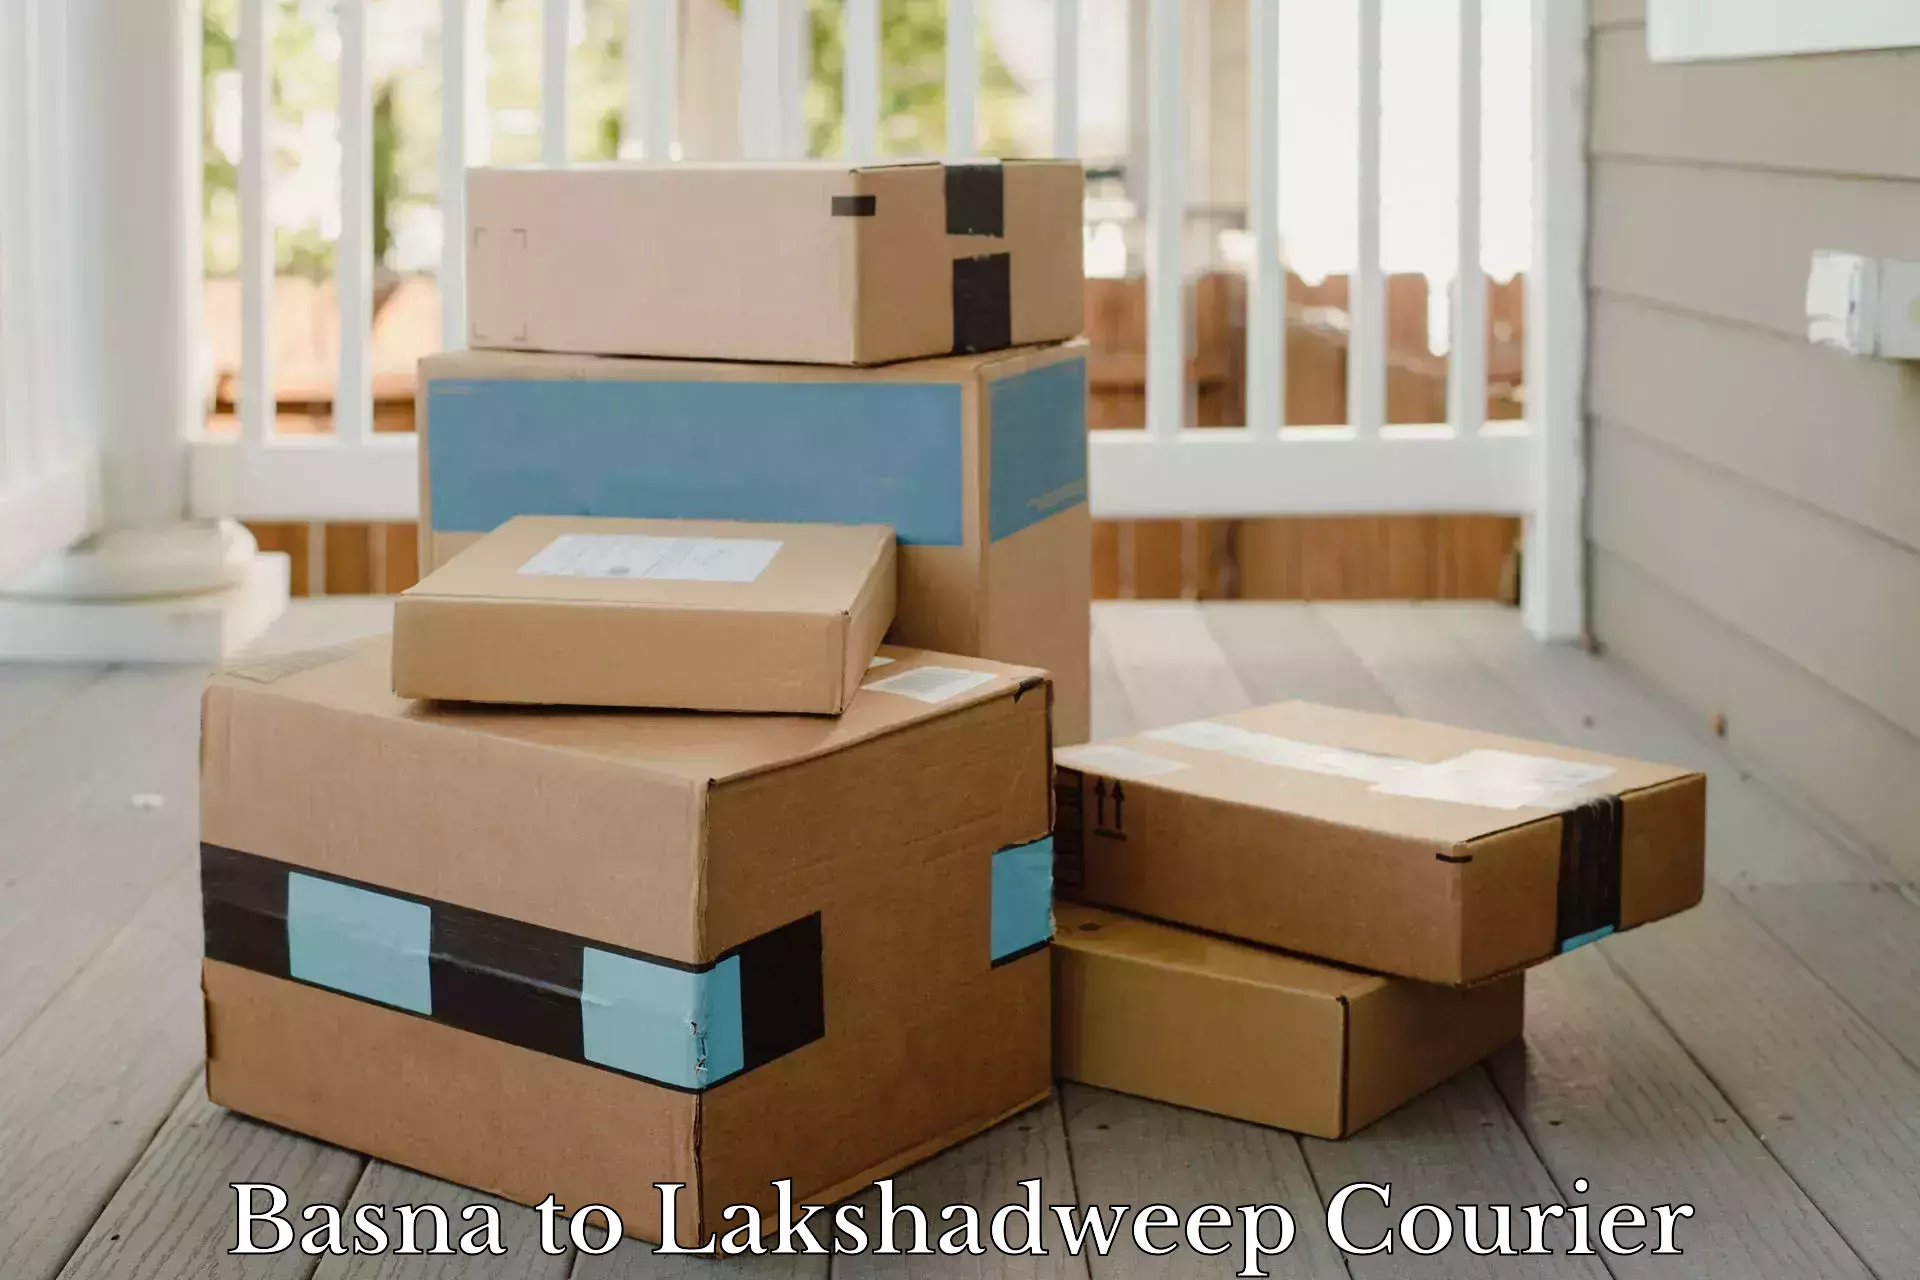 Sustainable delivery practices Basna to Lakshadweep